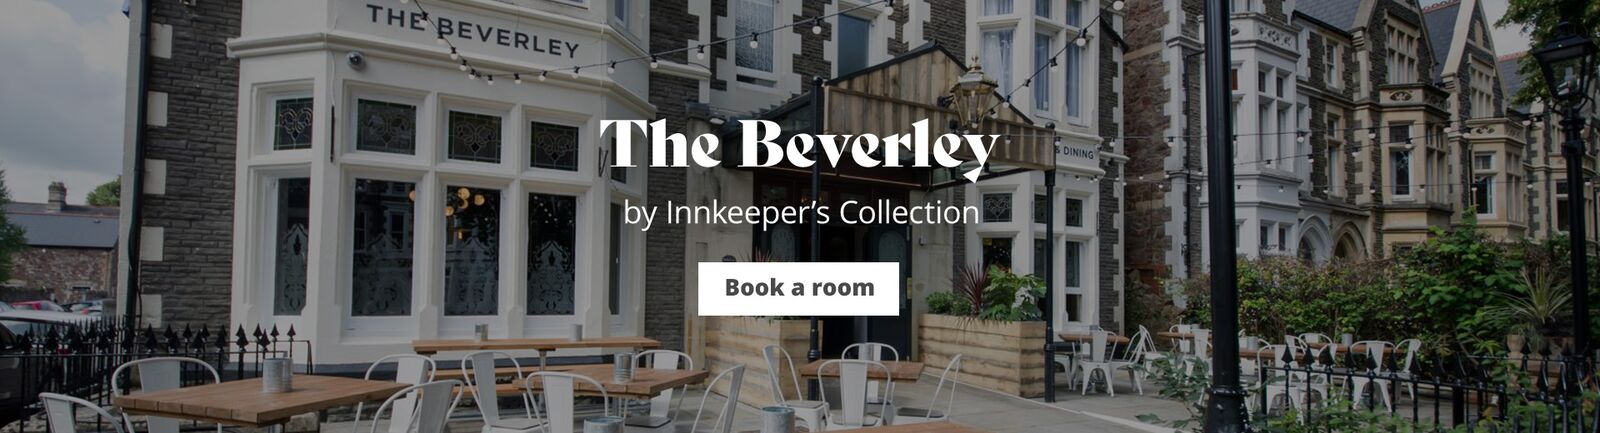 The Beverley Cardiff